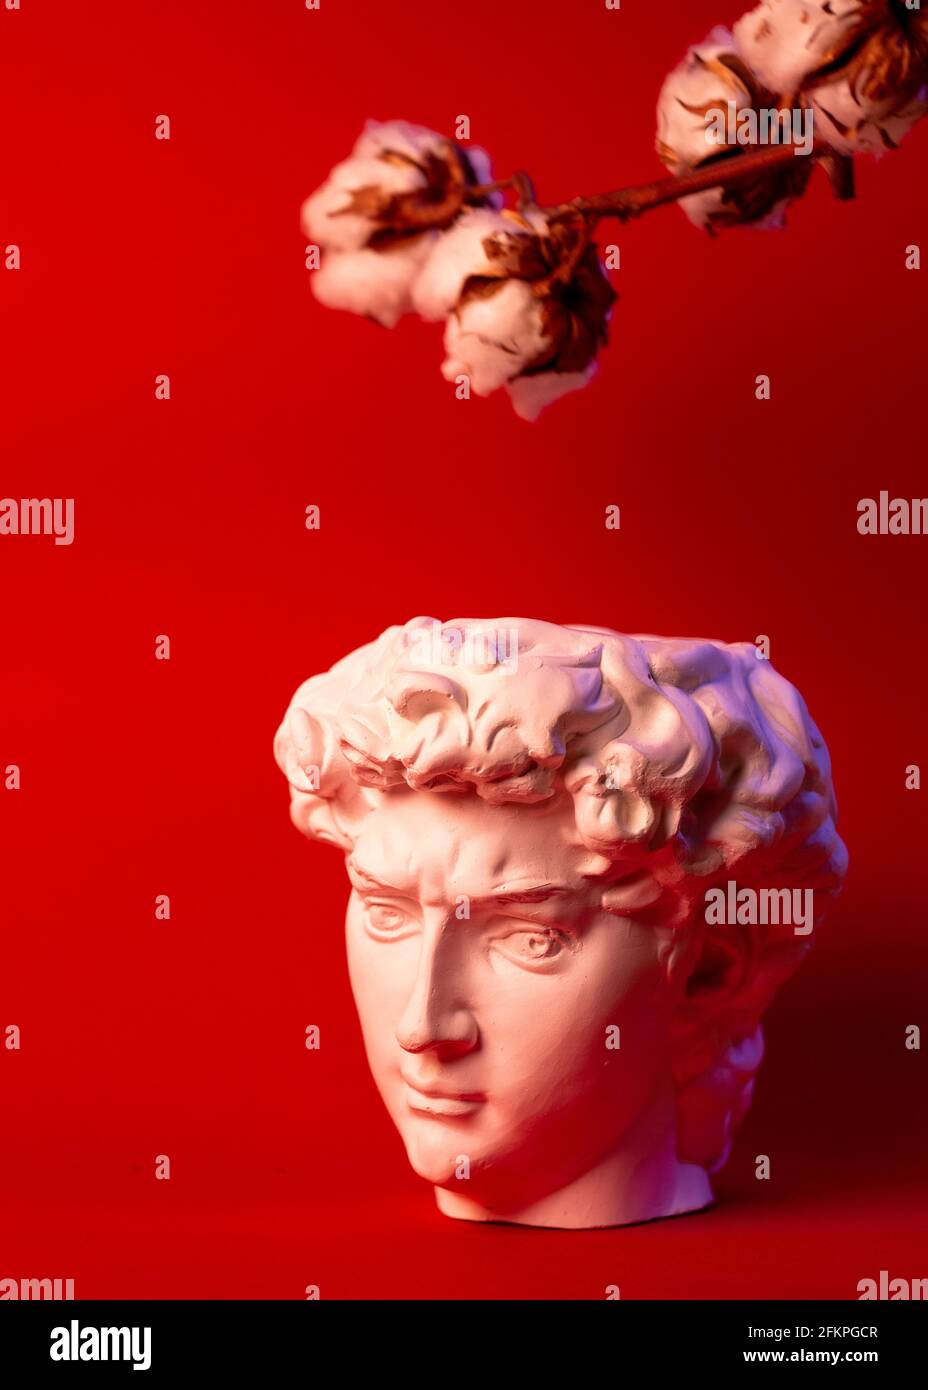 Plaster pot in the form of David's head on a red background. Stock Photo